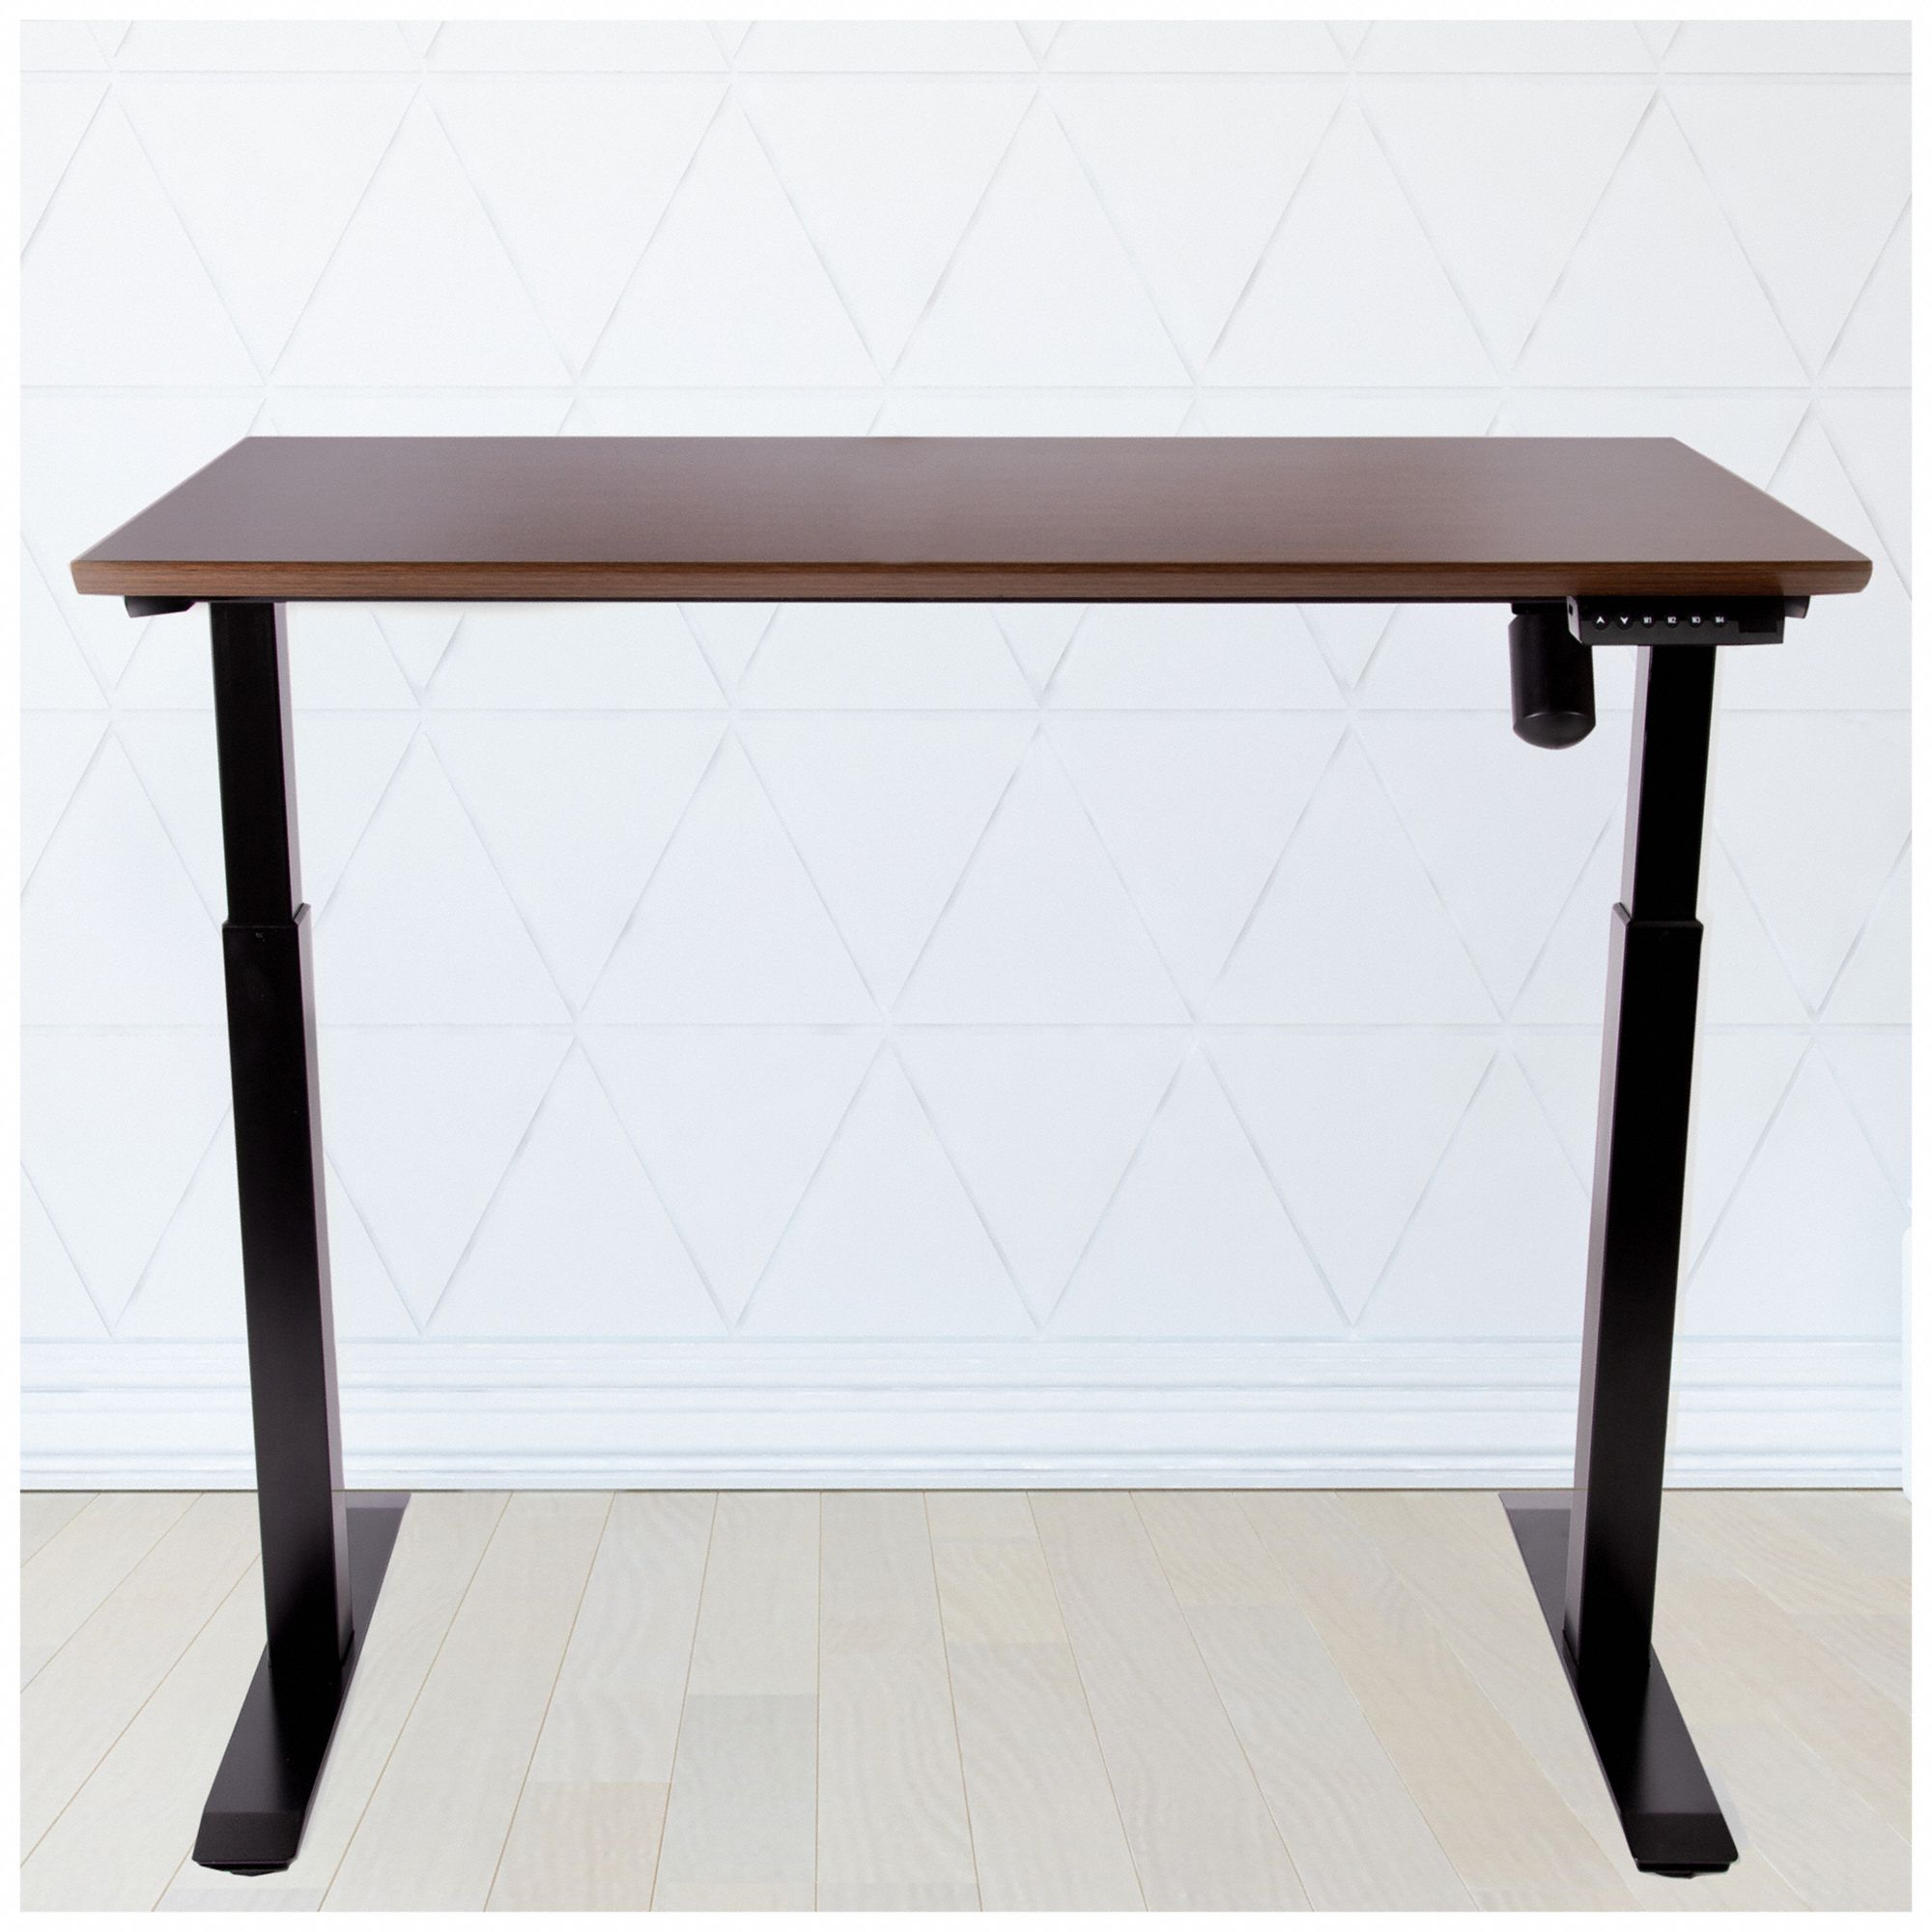 Adjustable Desk: 47 in Overall Wd, 28 in to 47 in, 24 in Overall Dp, Walnut Top